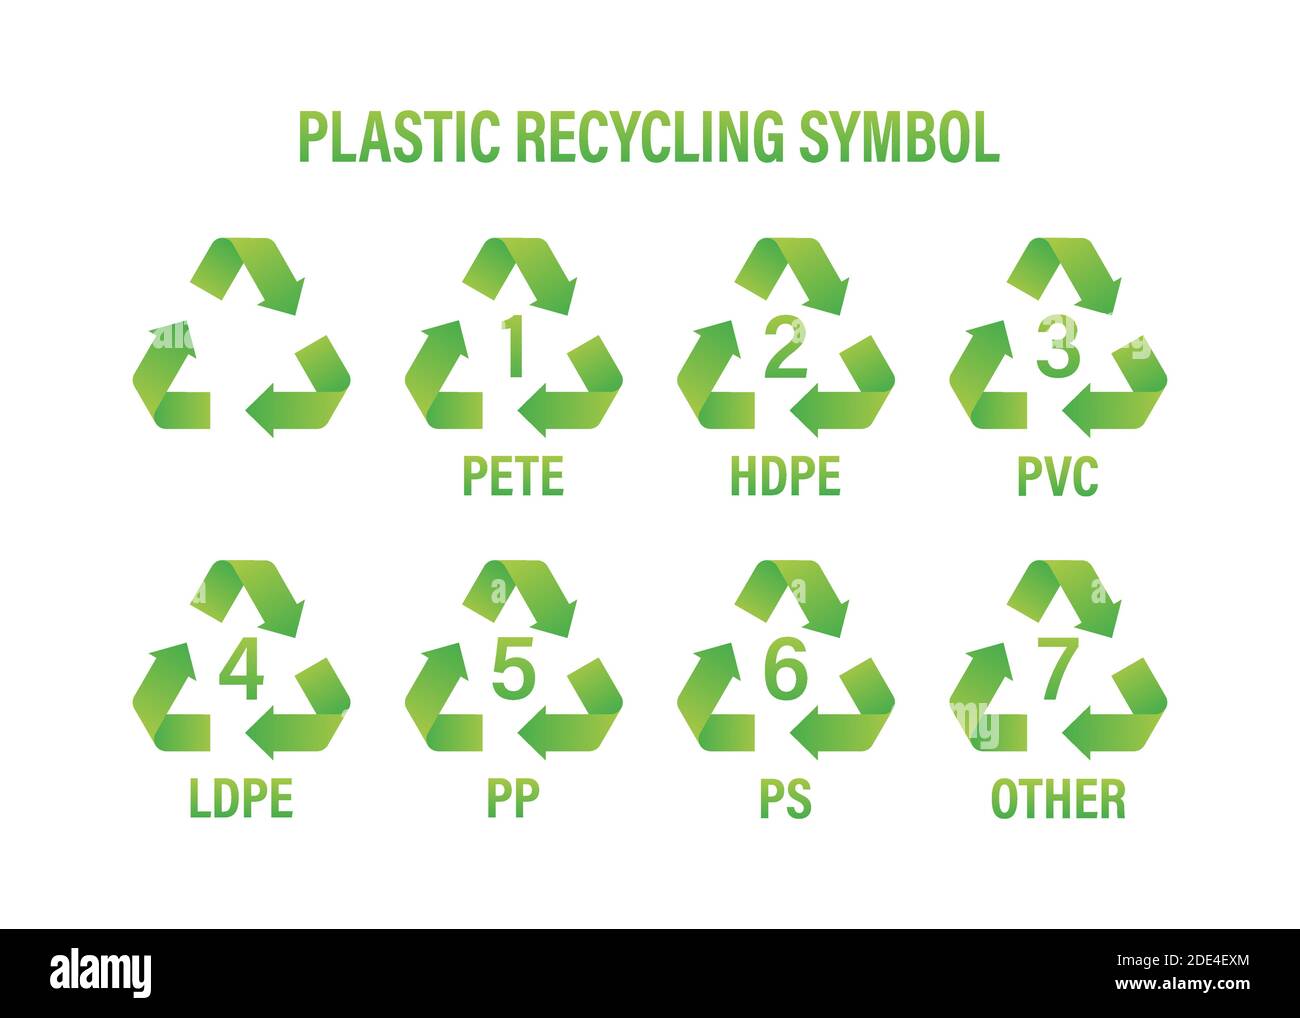 Recycle icon symbol vector. Plastic recycling, great design for any purposes. Recycle recycling symbol. Vector stock illustration. Stock Vector